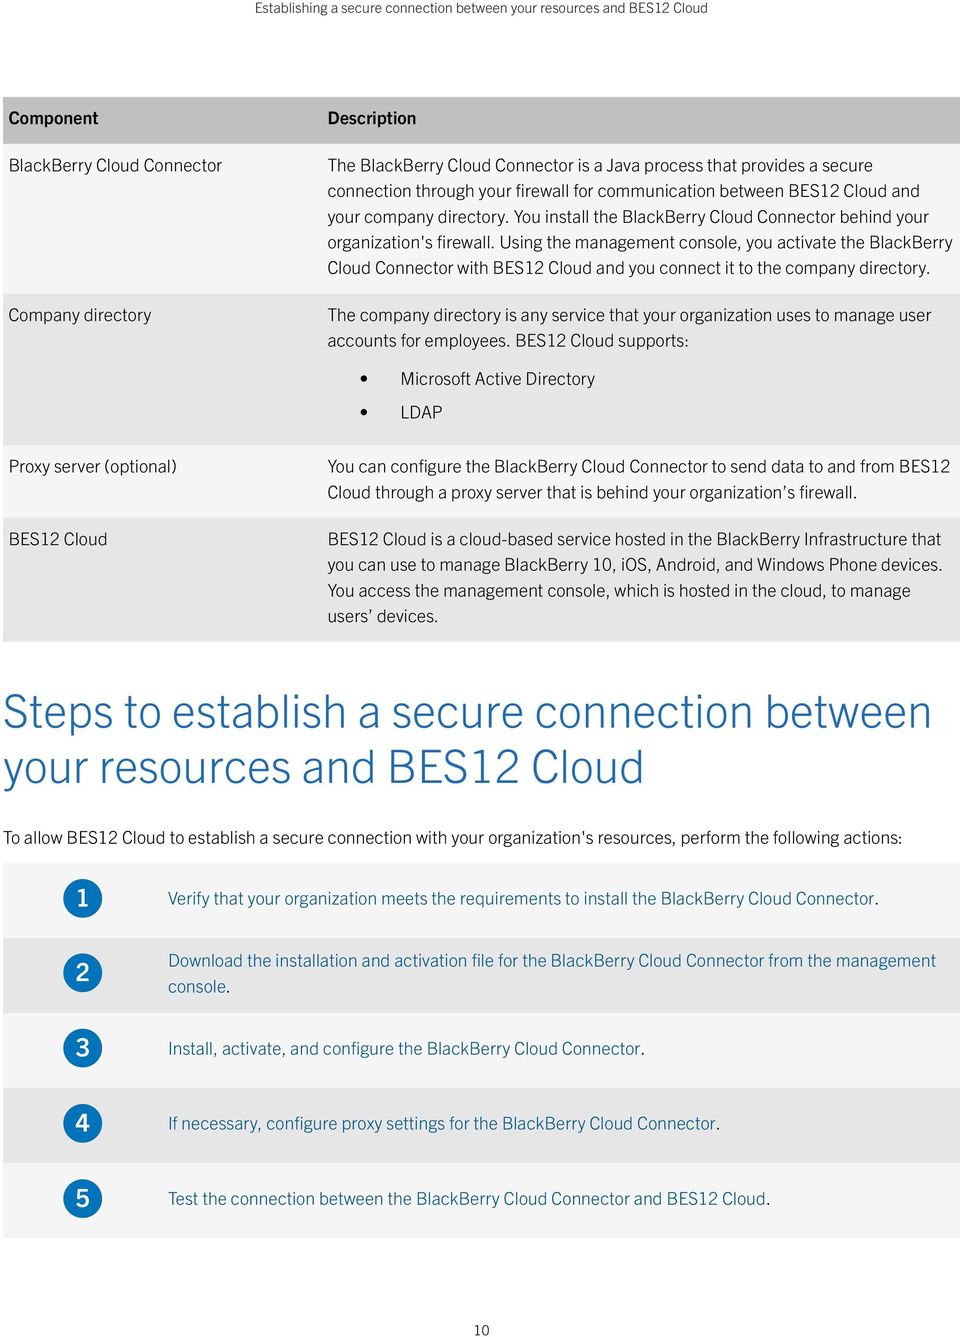 Using the management console, you activate the BlackBerry Cloud Connector with BES12 Cloud and you connect it to the company directory.